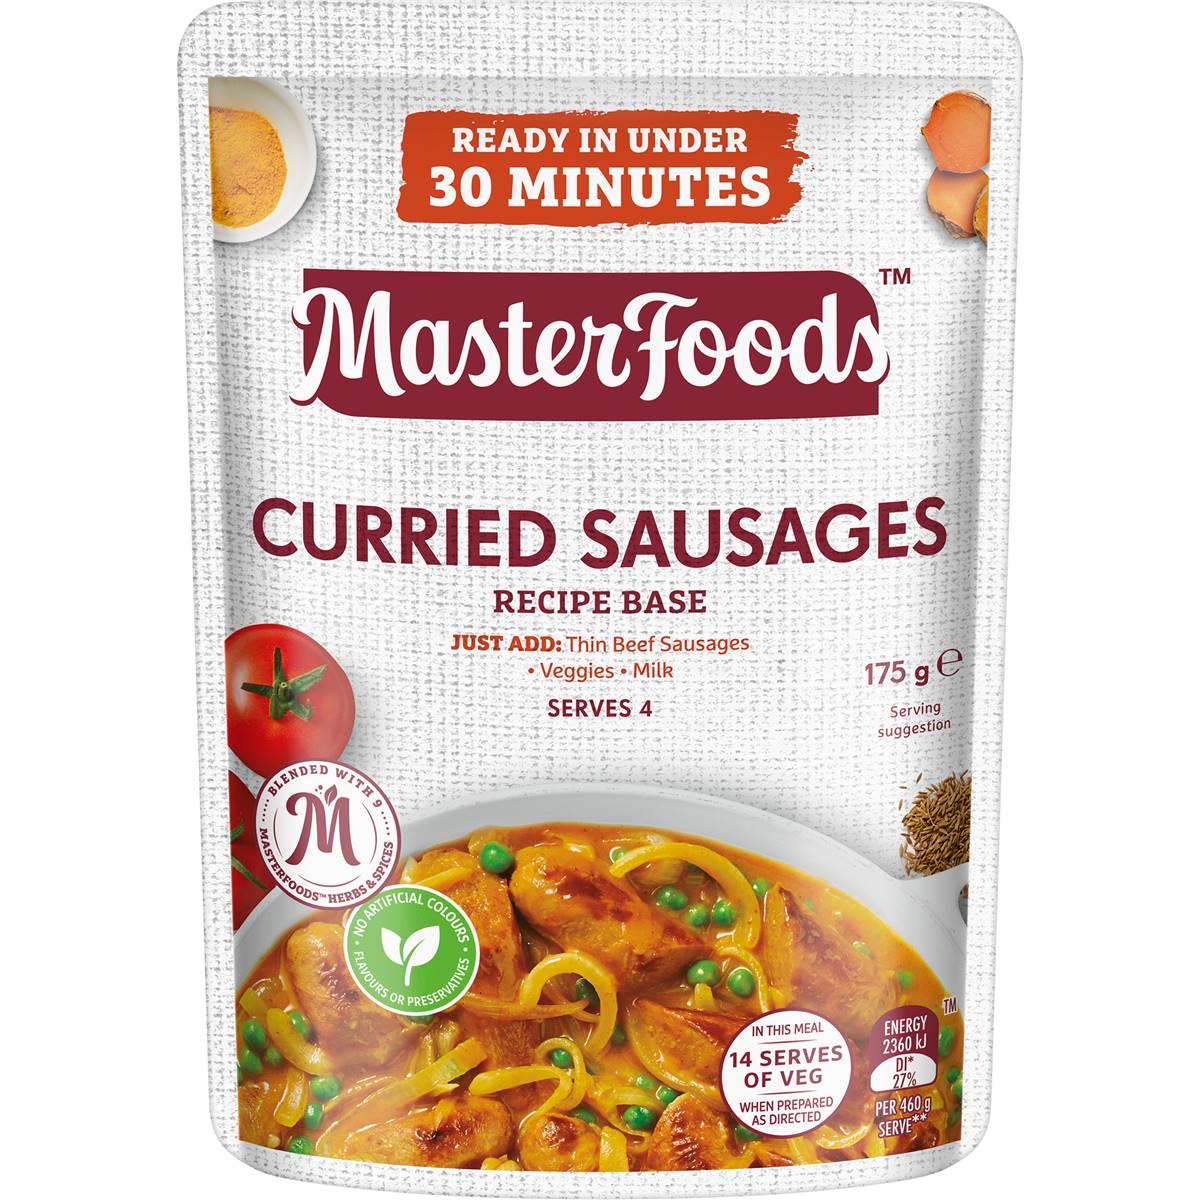 Masterfoods Recipe Base Curried Sausages